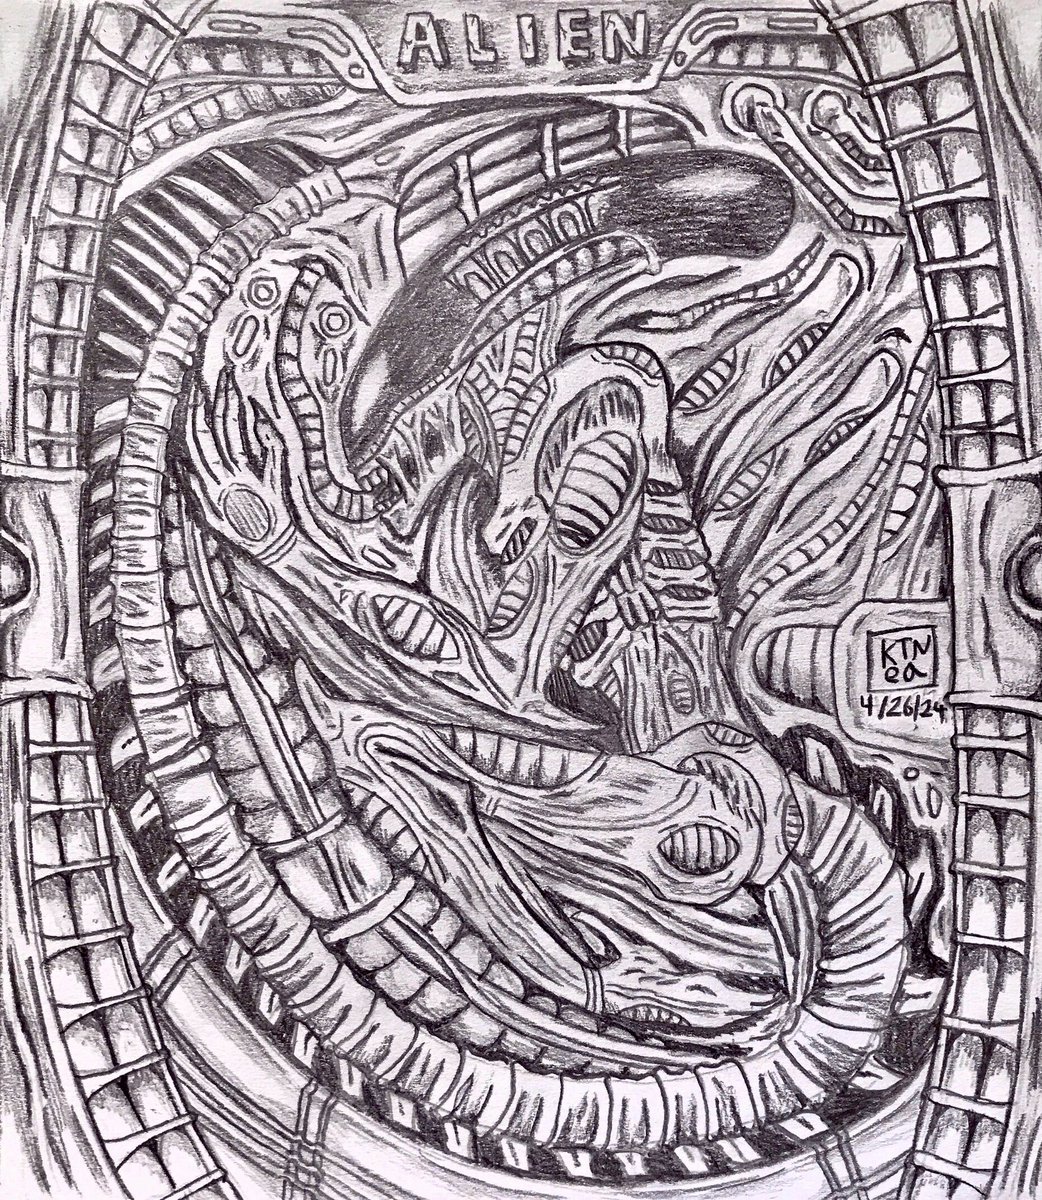 Happy #AlienDay !  To celebrate I made this sketch!  For this sketch, I borrowed elements from the works of HR Giger, the artist who designed the original Xenomorph!